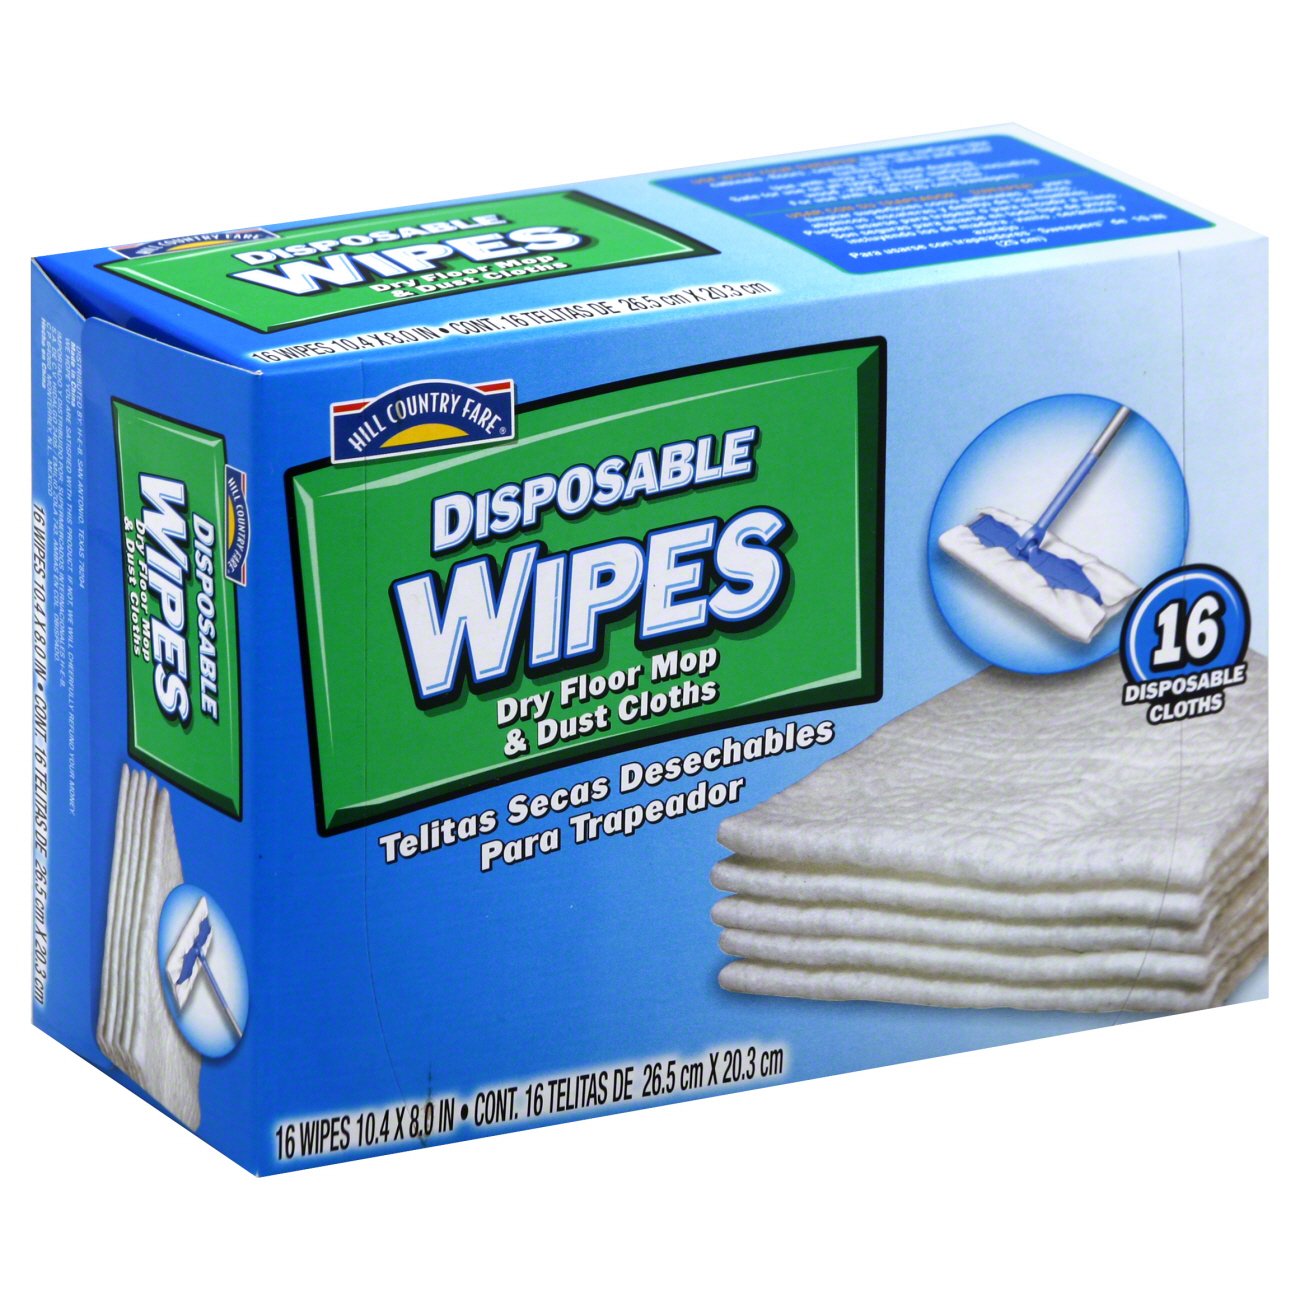 Hill Country Fare Dry Floor Mop & Dust Cloths Disposable Wipes - Shop  Brooms & Dust Mops at H-E-B